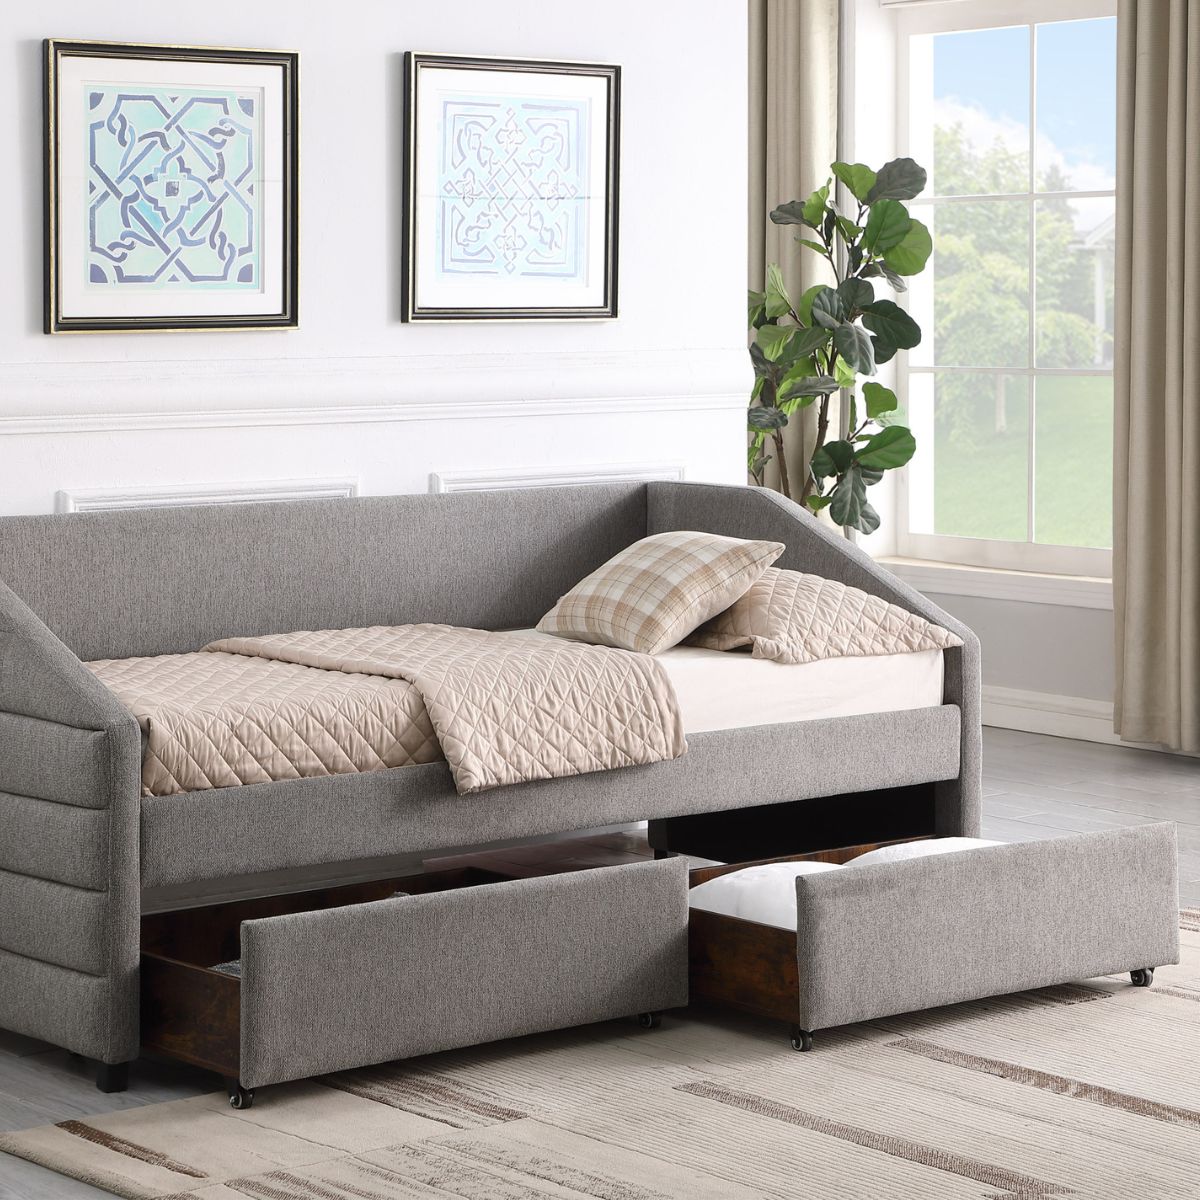 Baku Upholstered Day Bed with Storage Grey - 3